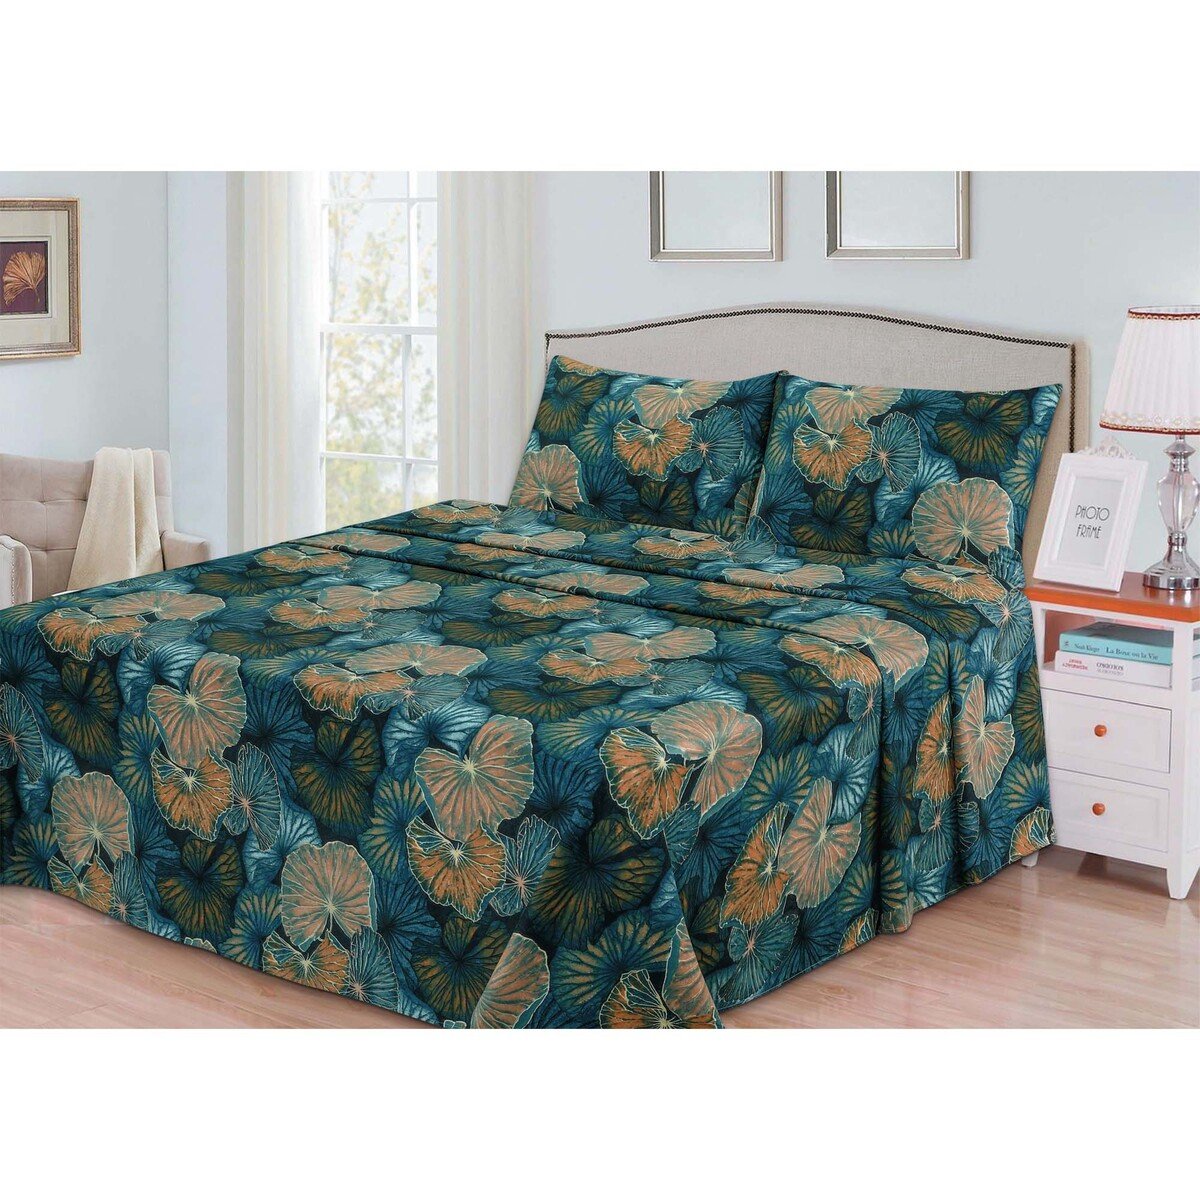 Maple Leaf Bed Sheet 250x270cm Assorted